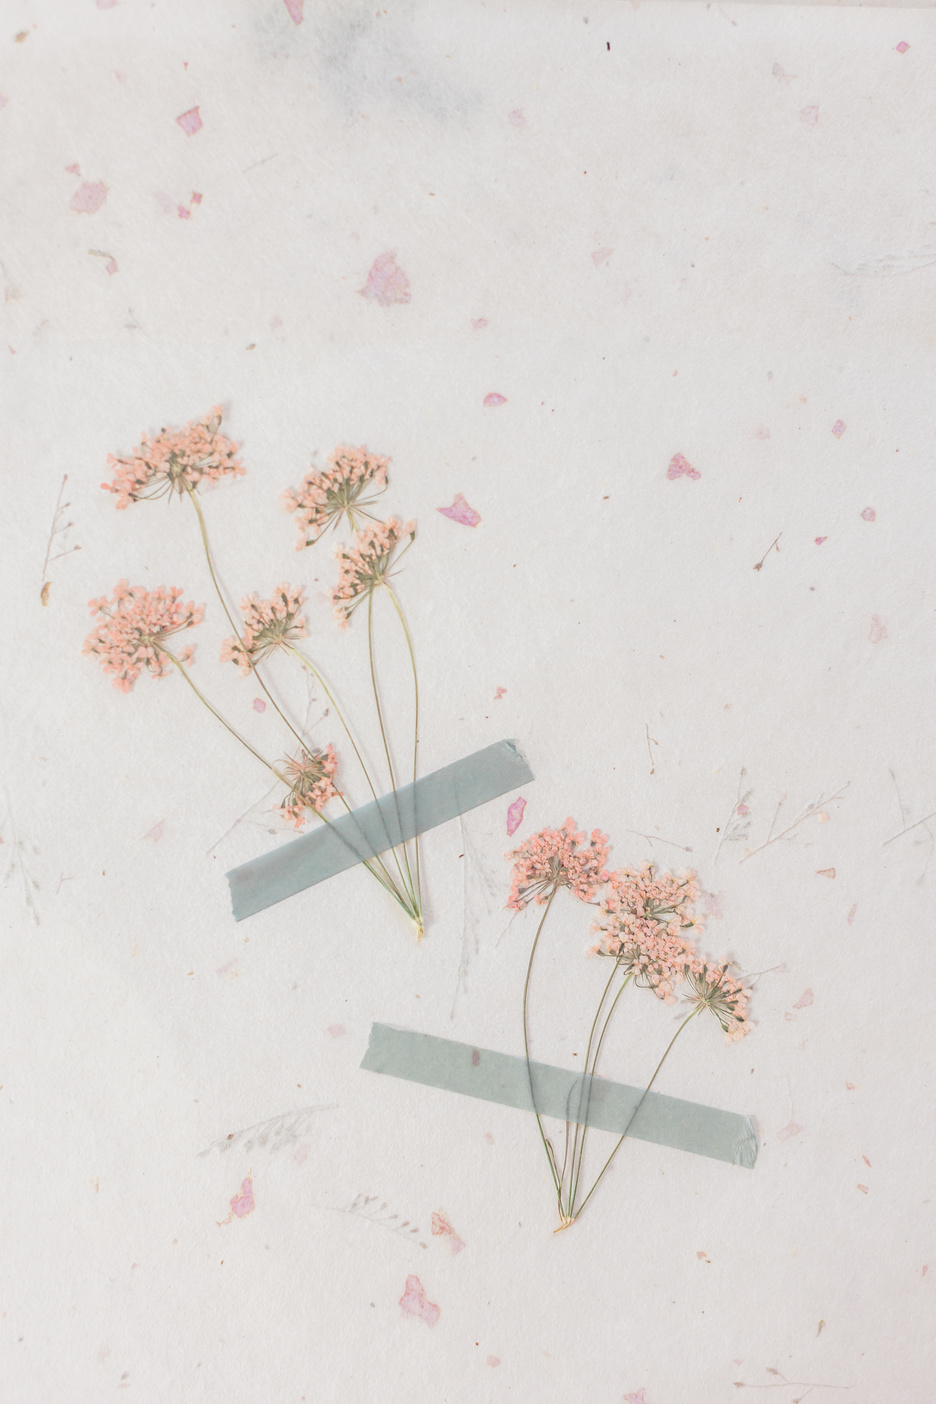 Pressed Flowers on White Background